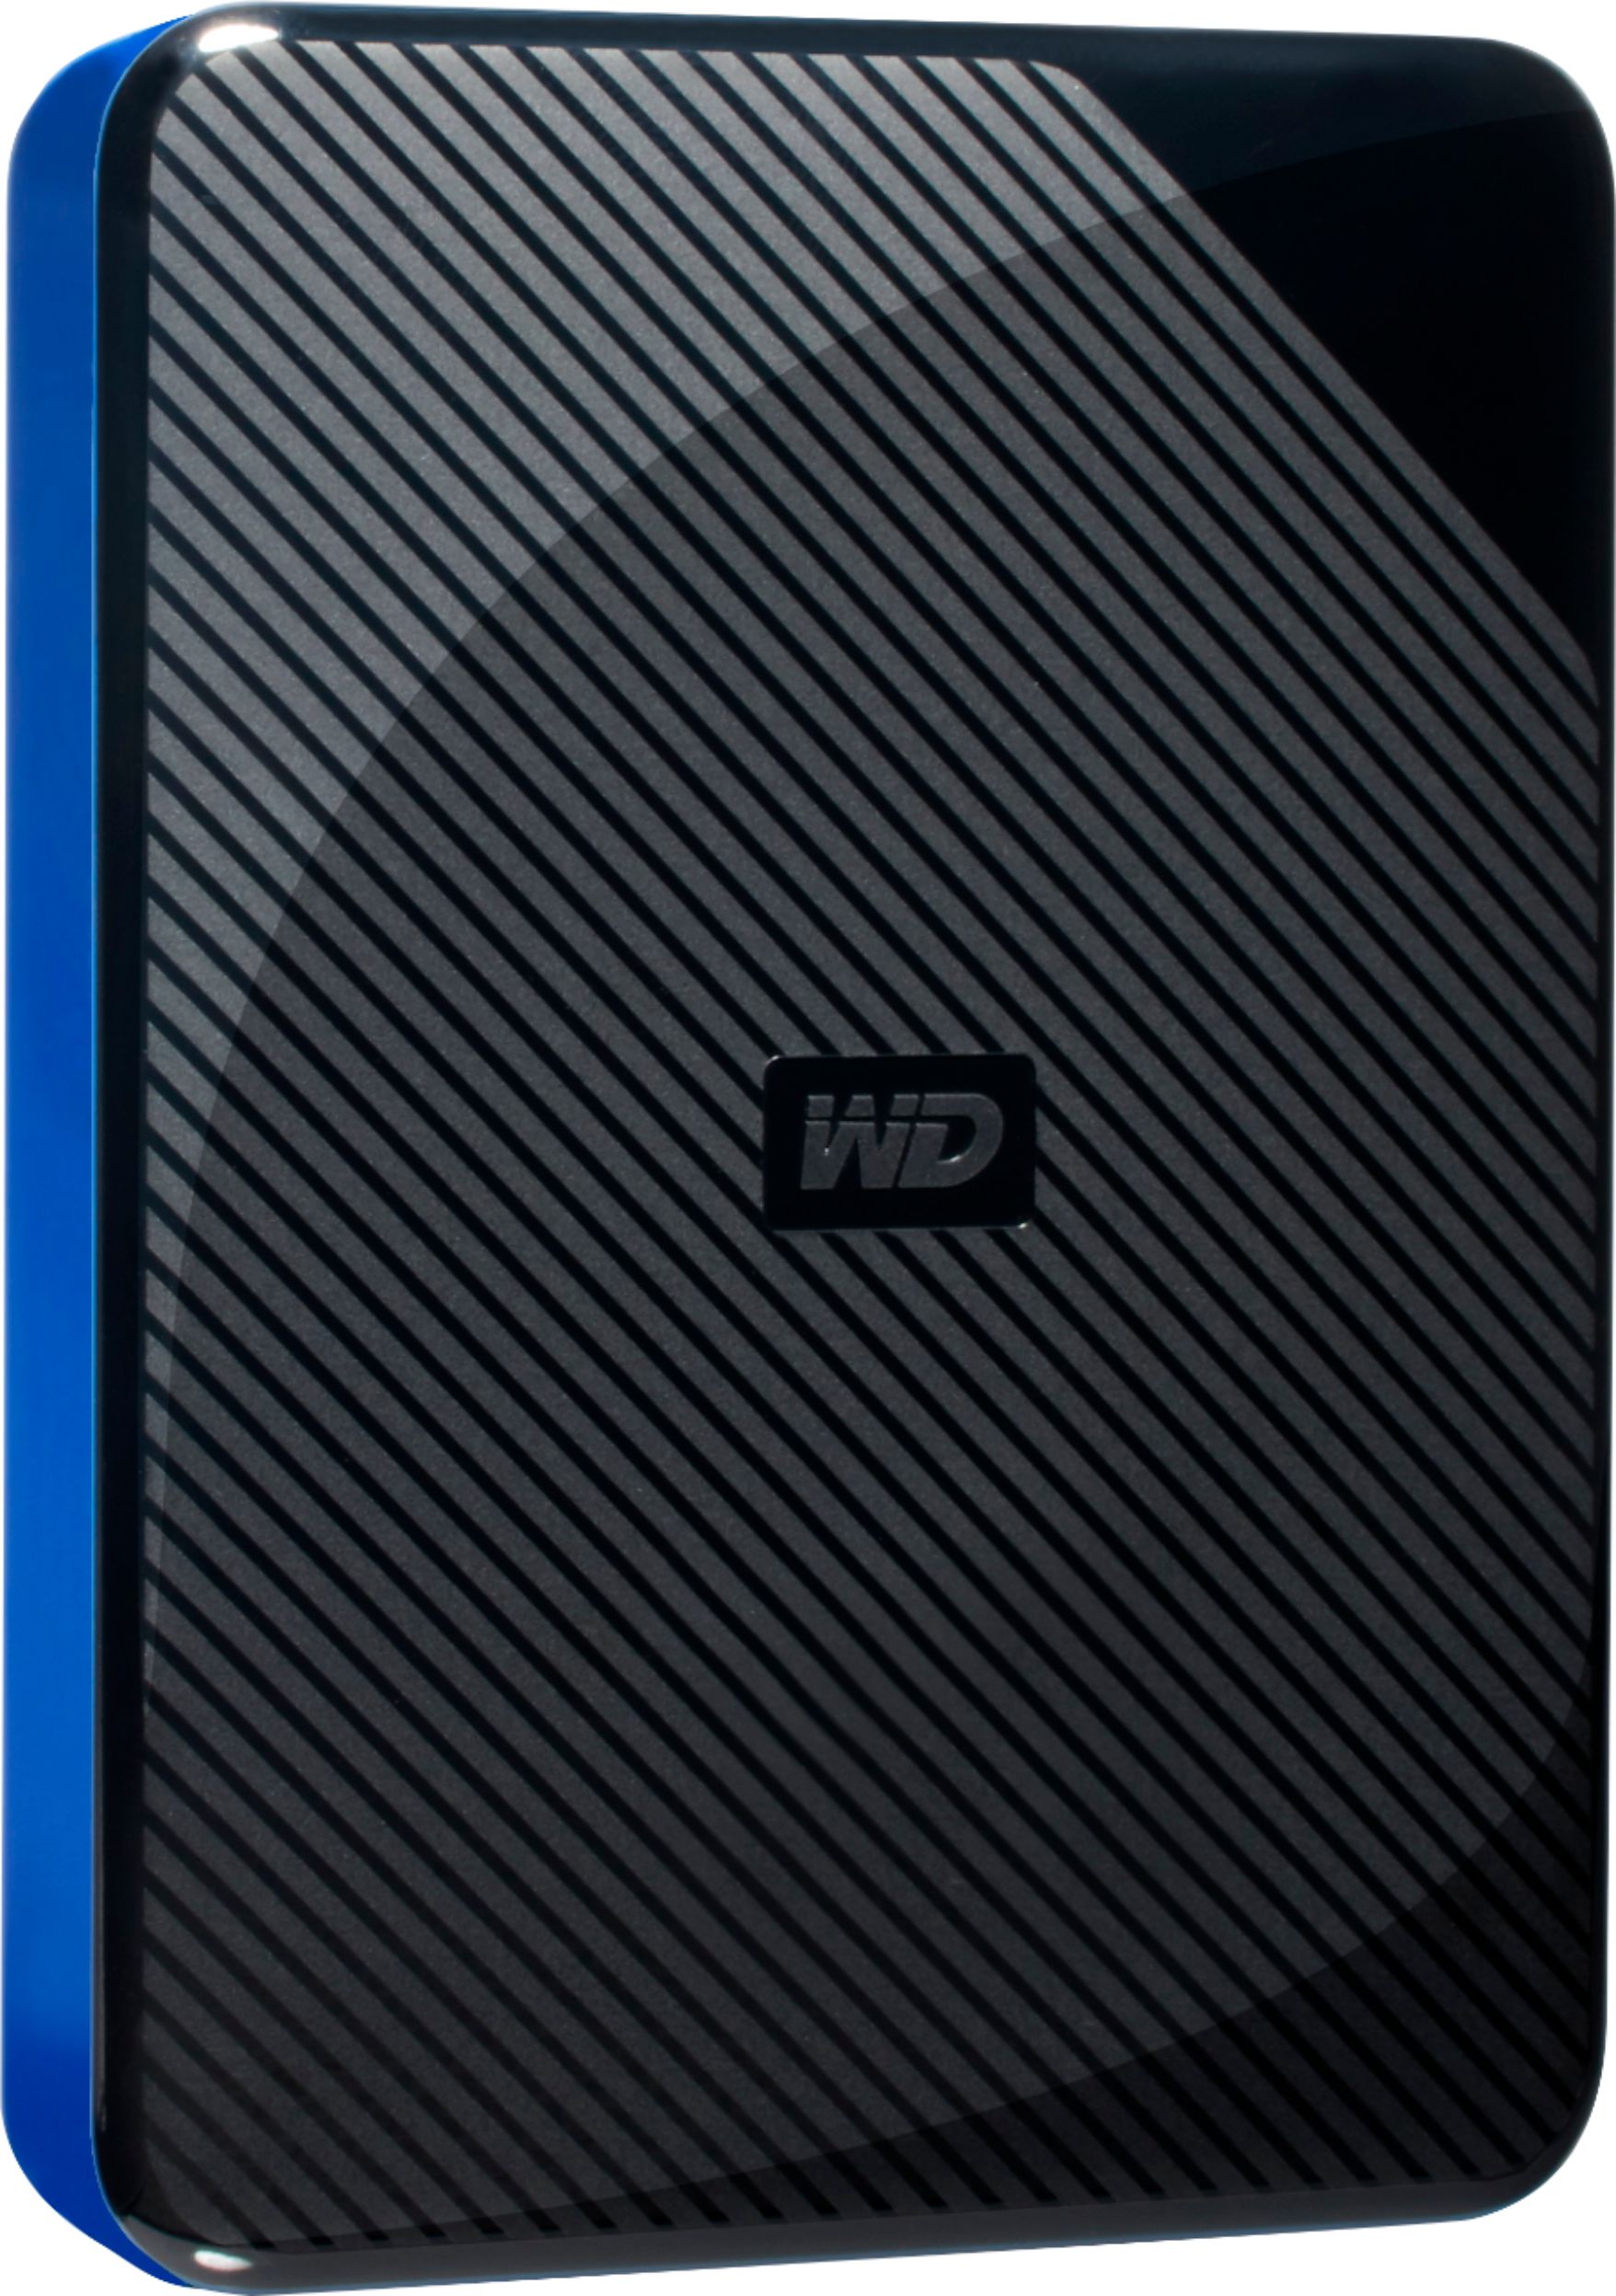 WD - 4TB Game Drive for PS4 External USB 3.0 Portable Hard Drive -  Black/Blue